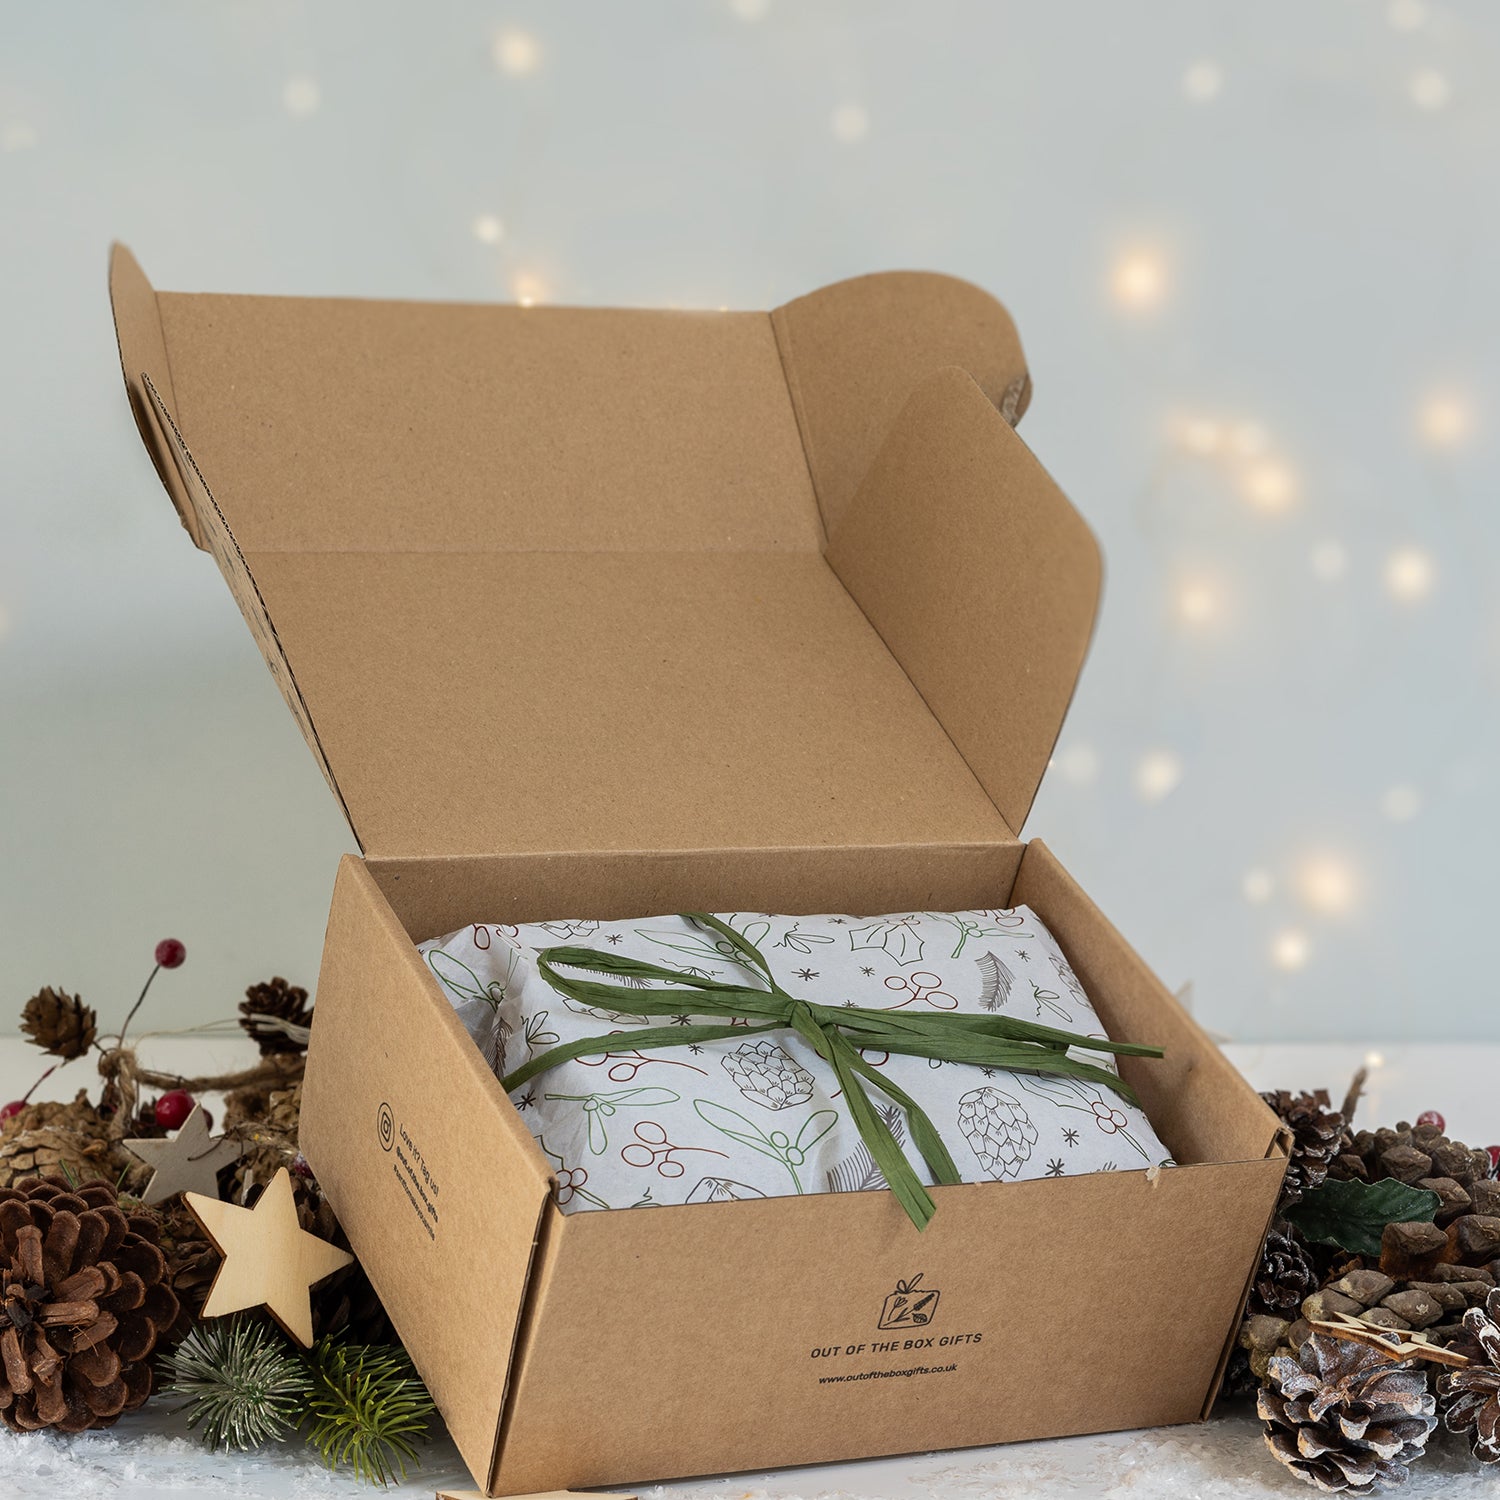 Festive Corporate Hampers - Corporate Christmas Gifts - Sustainable Christmas Gifts